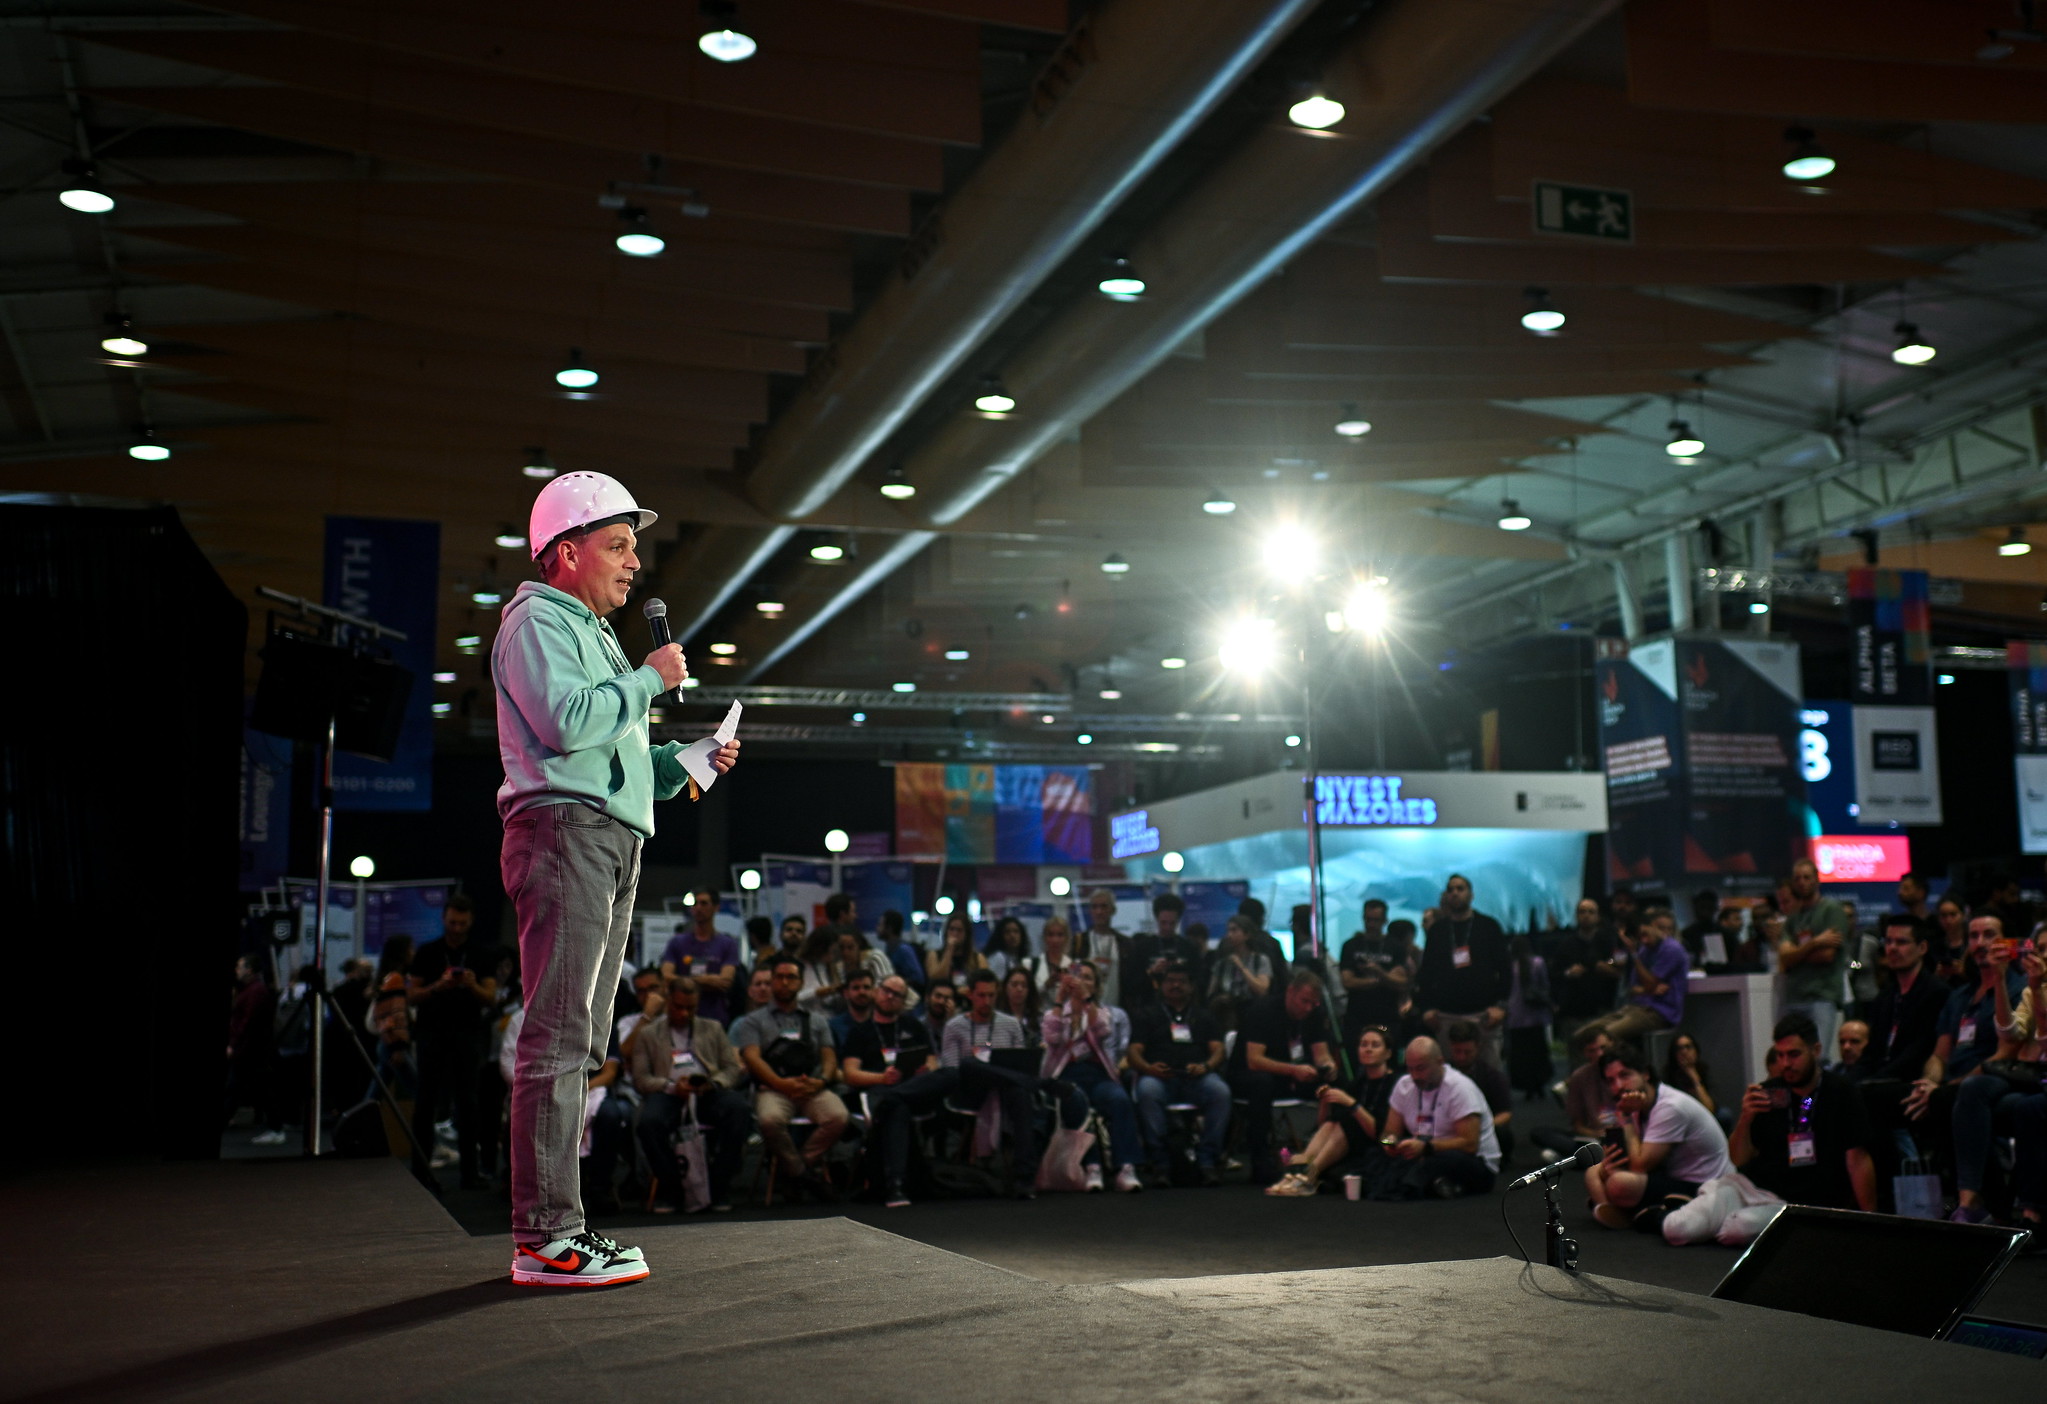 A photo of a person, Mathew Norbury, CEO of FC Laboratories, standing onstage at Web Summit. They are holding a microphone and appear to be speaking. There is a large crowd of people that appear to be watching this person.